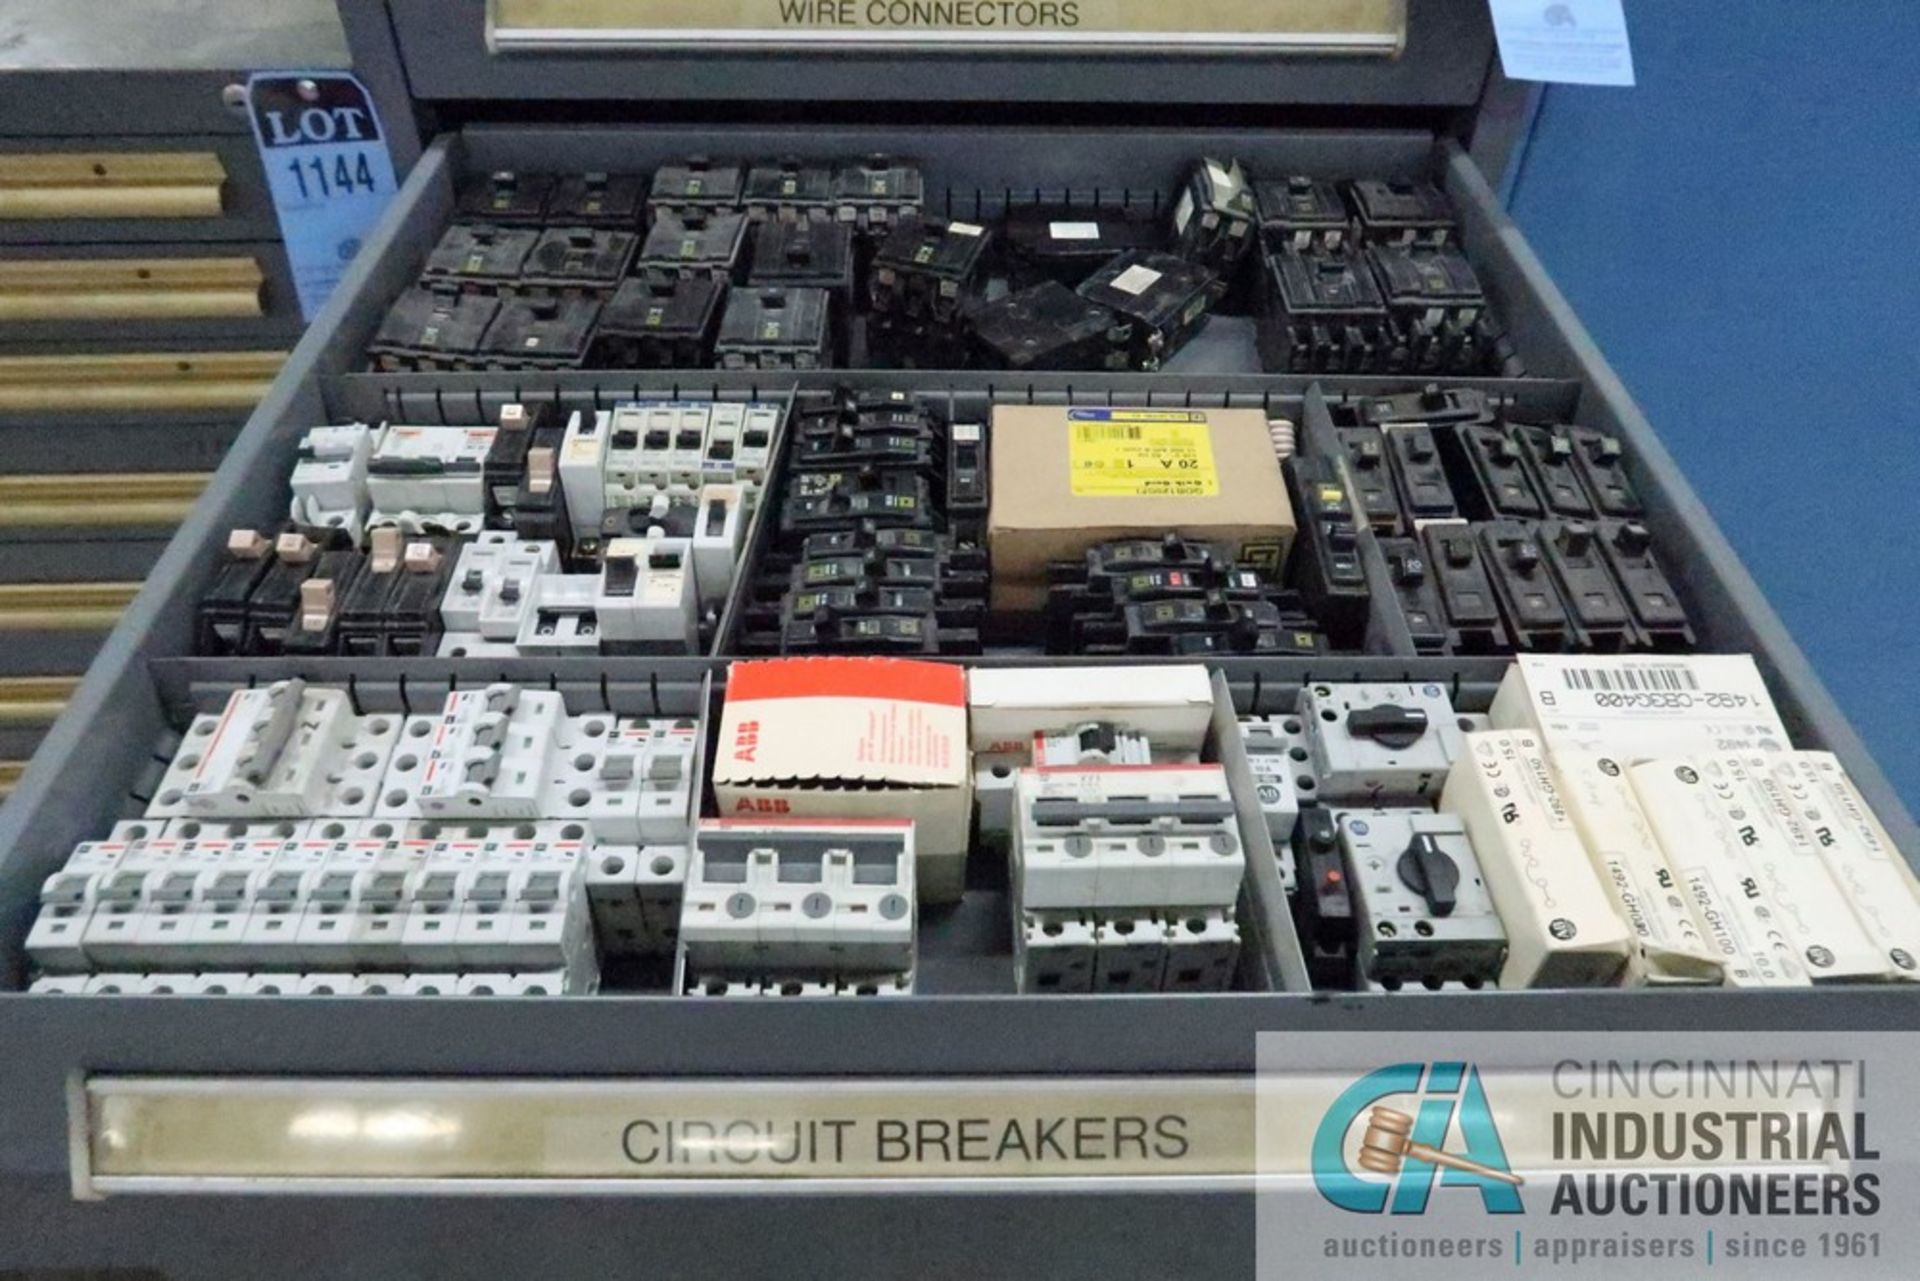 NINE DRAWER VIDMAR CABINET AND CONTENTS LOADED WITH WIRE CONNECTORS, CIRCUIT BREAKERS, PHOTOEYES, - Image 3 of 10